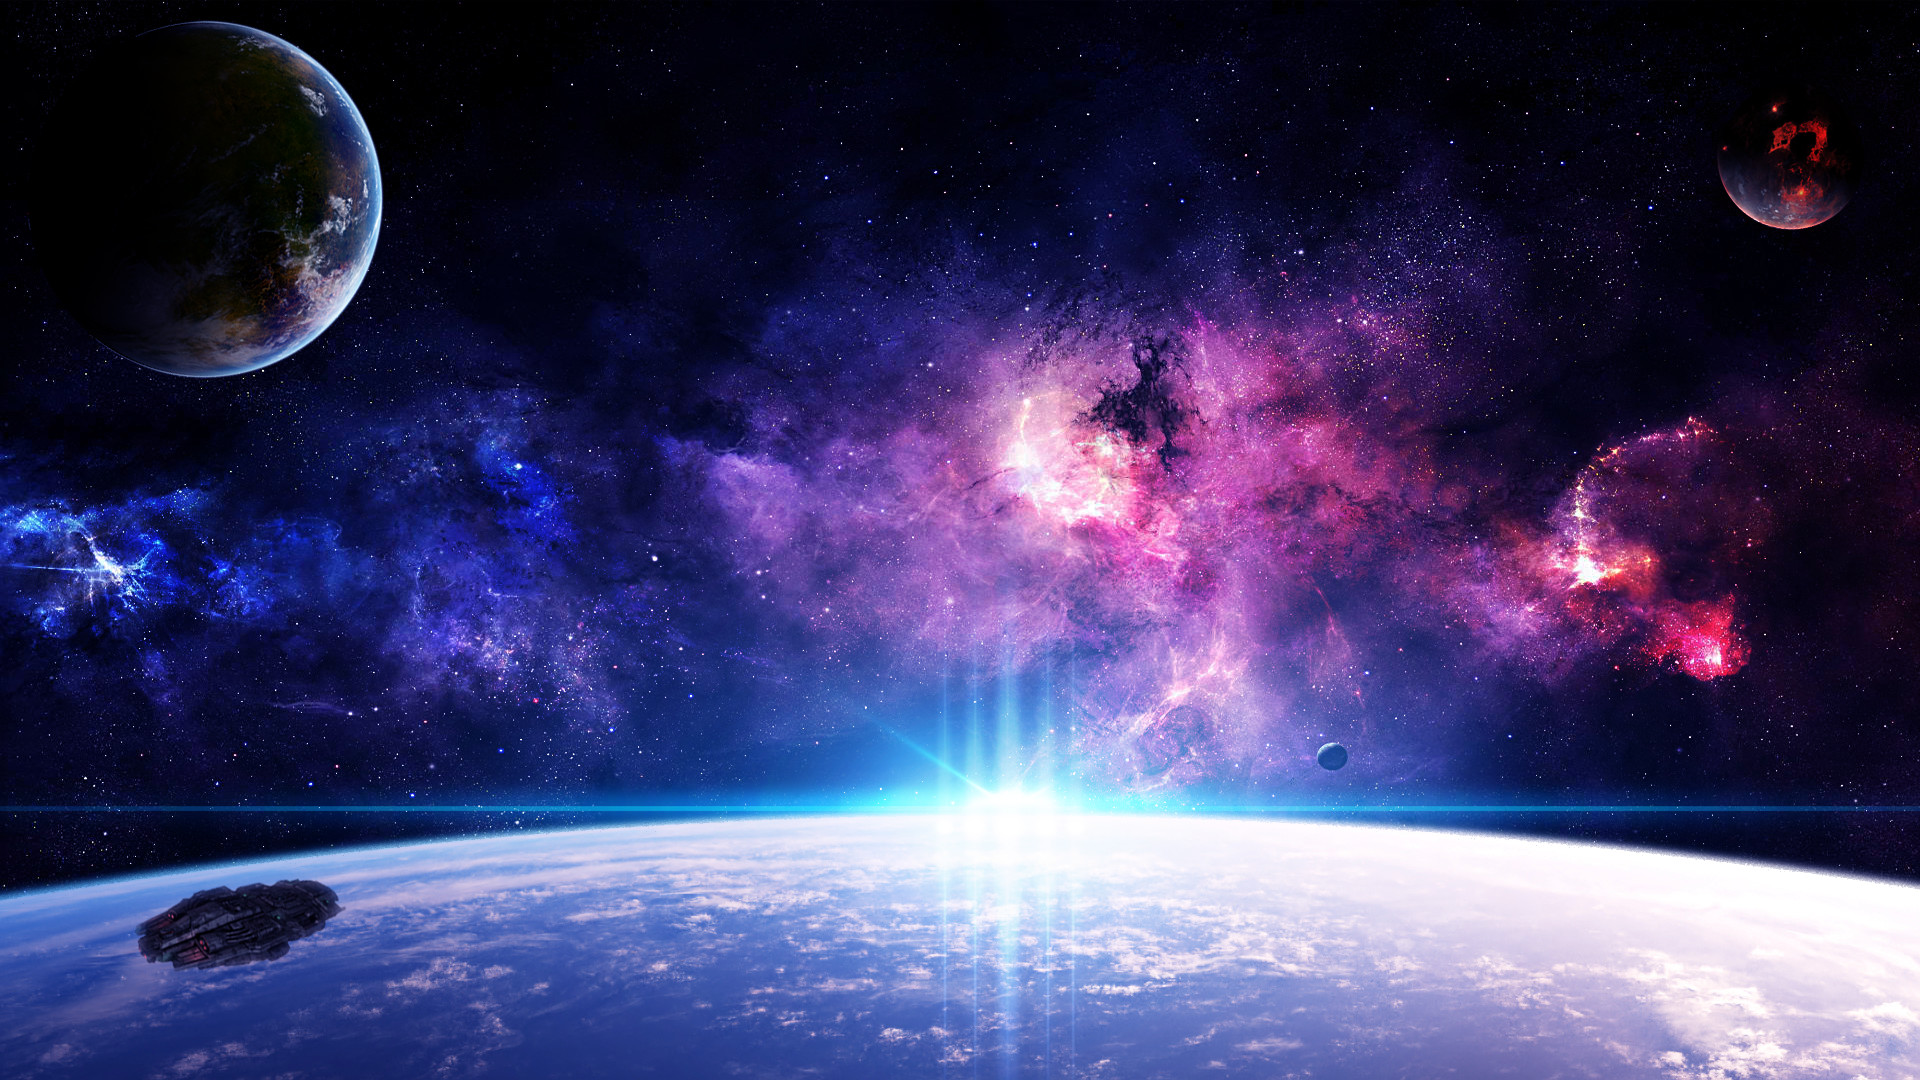 1920x1080 Art | Space | Pinterest | Spaces, Wallpaper and Wallpaper space